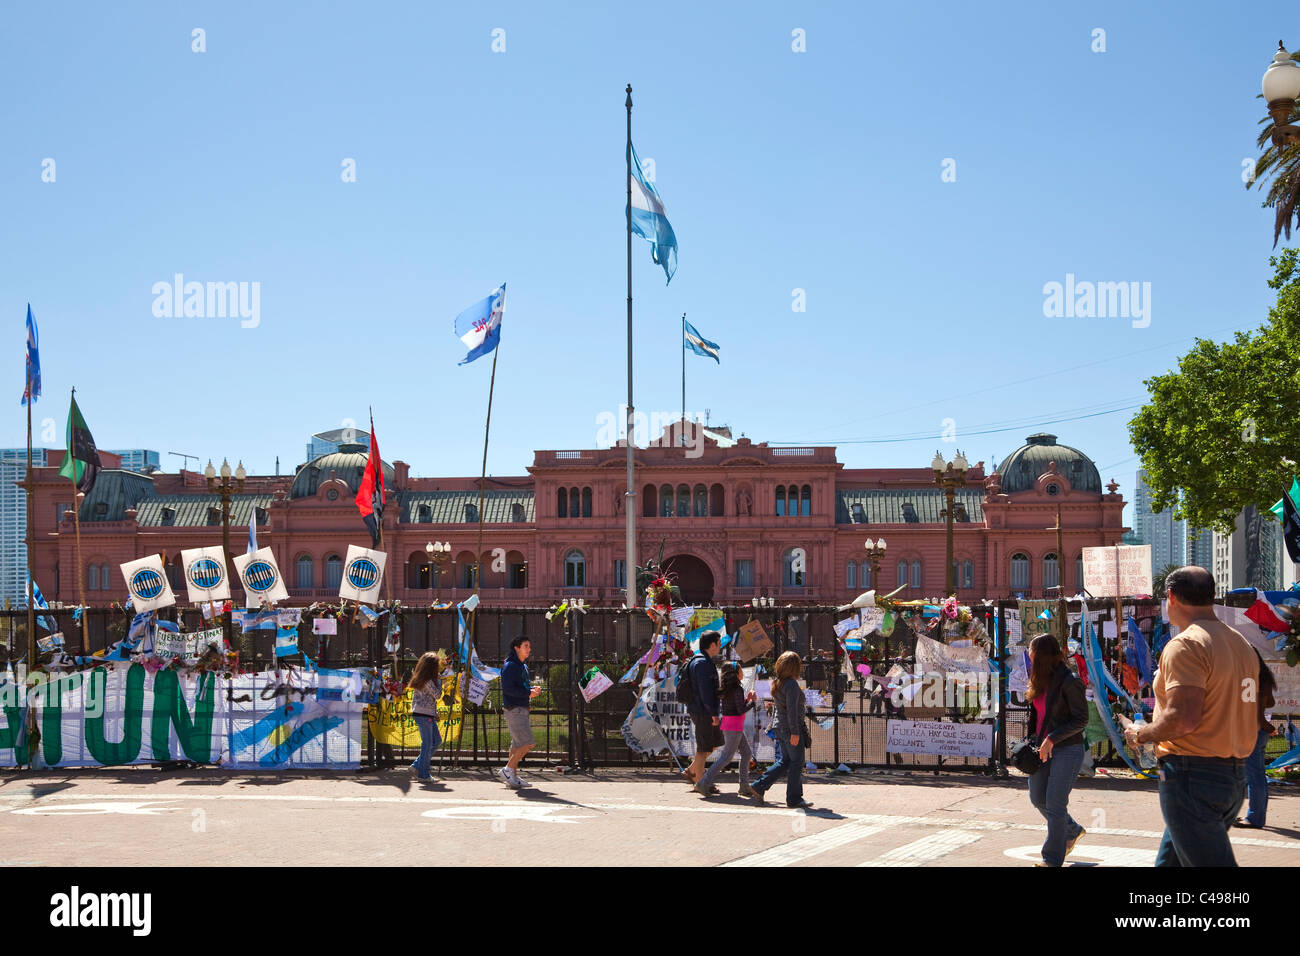 View of the Casa Rosada, Plaza De Mayo, Buenos Aires, Argentina, South America, with demonstration in front. Stock Photo